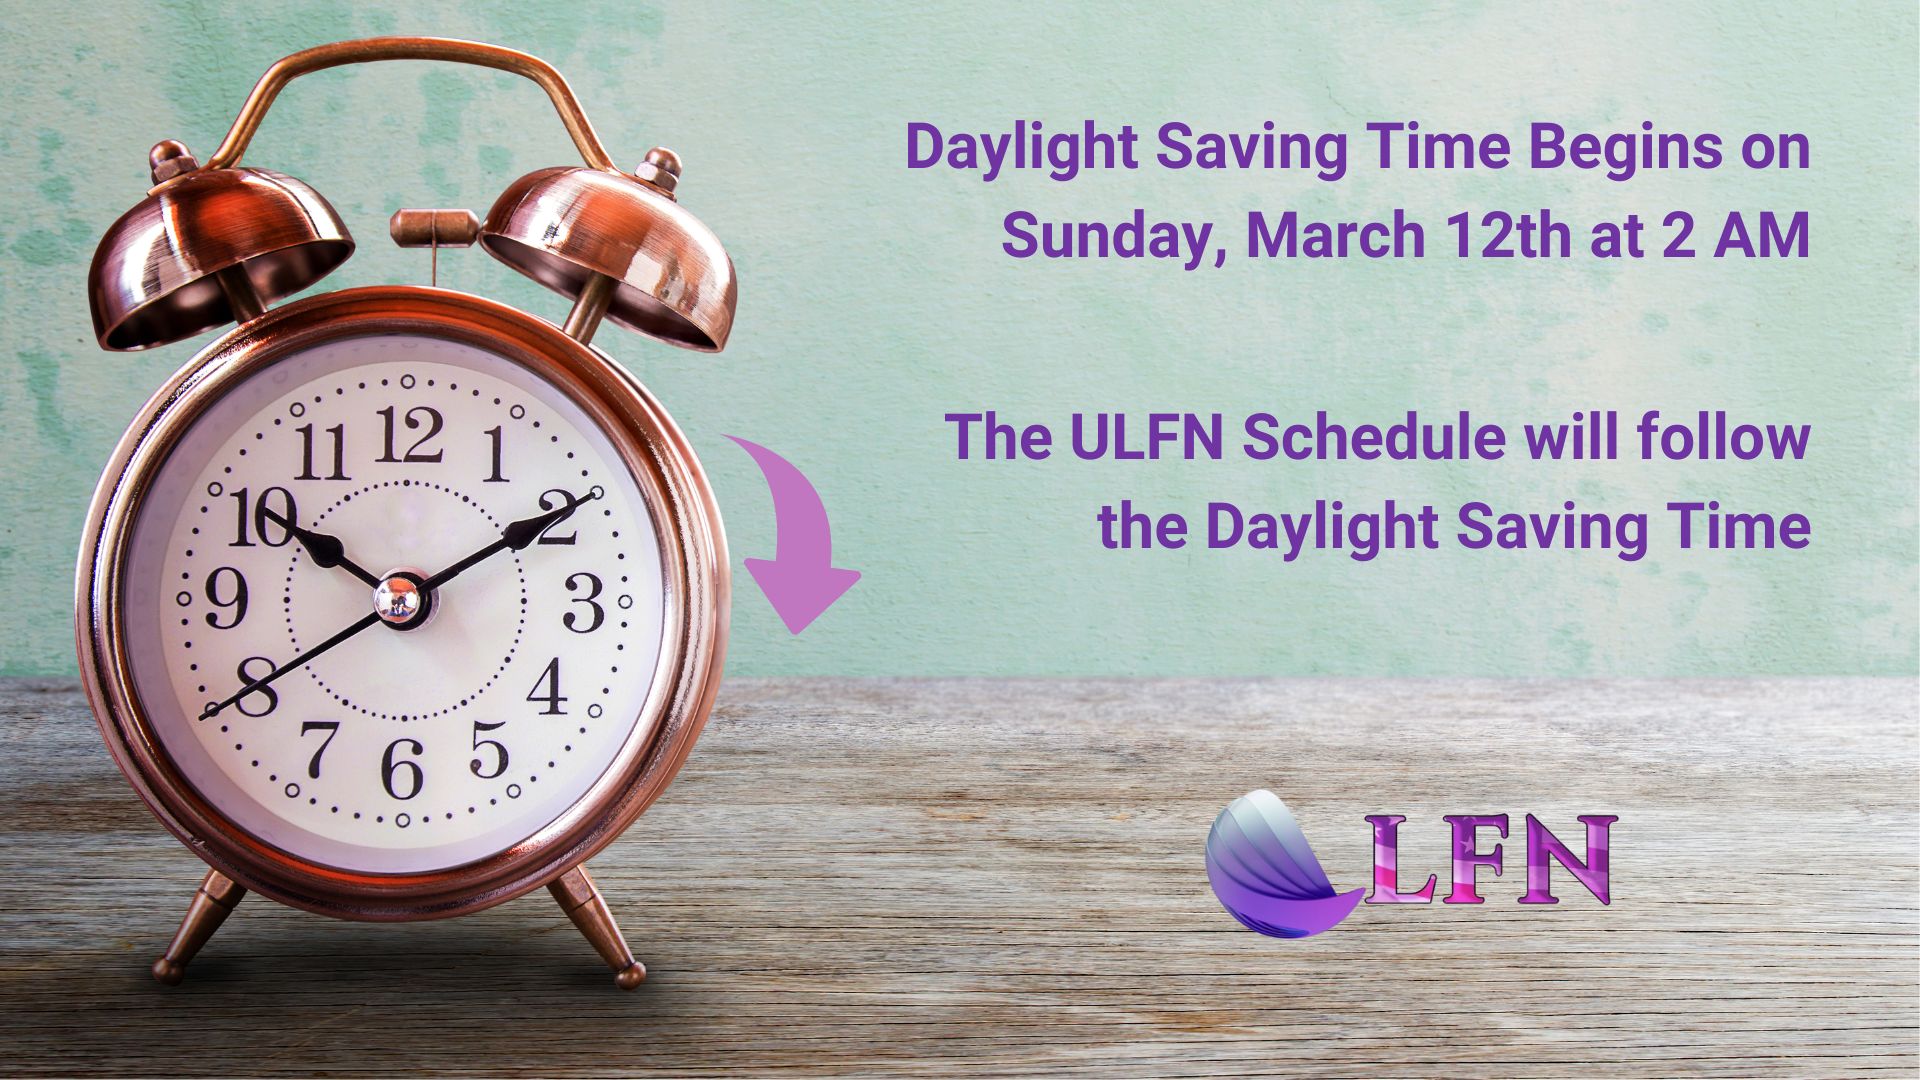 Daylight Saving Time on March 12th